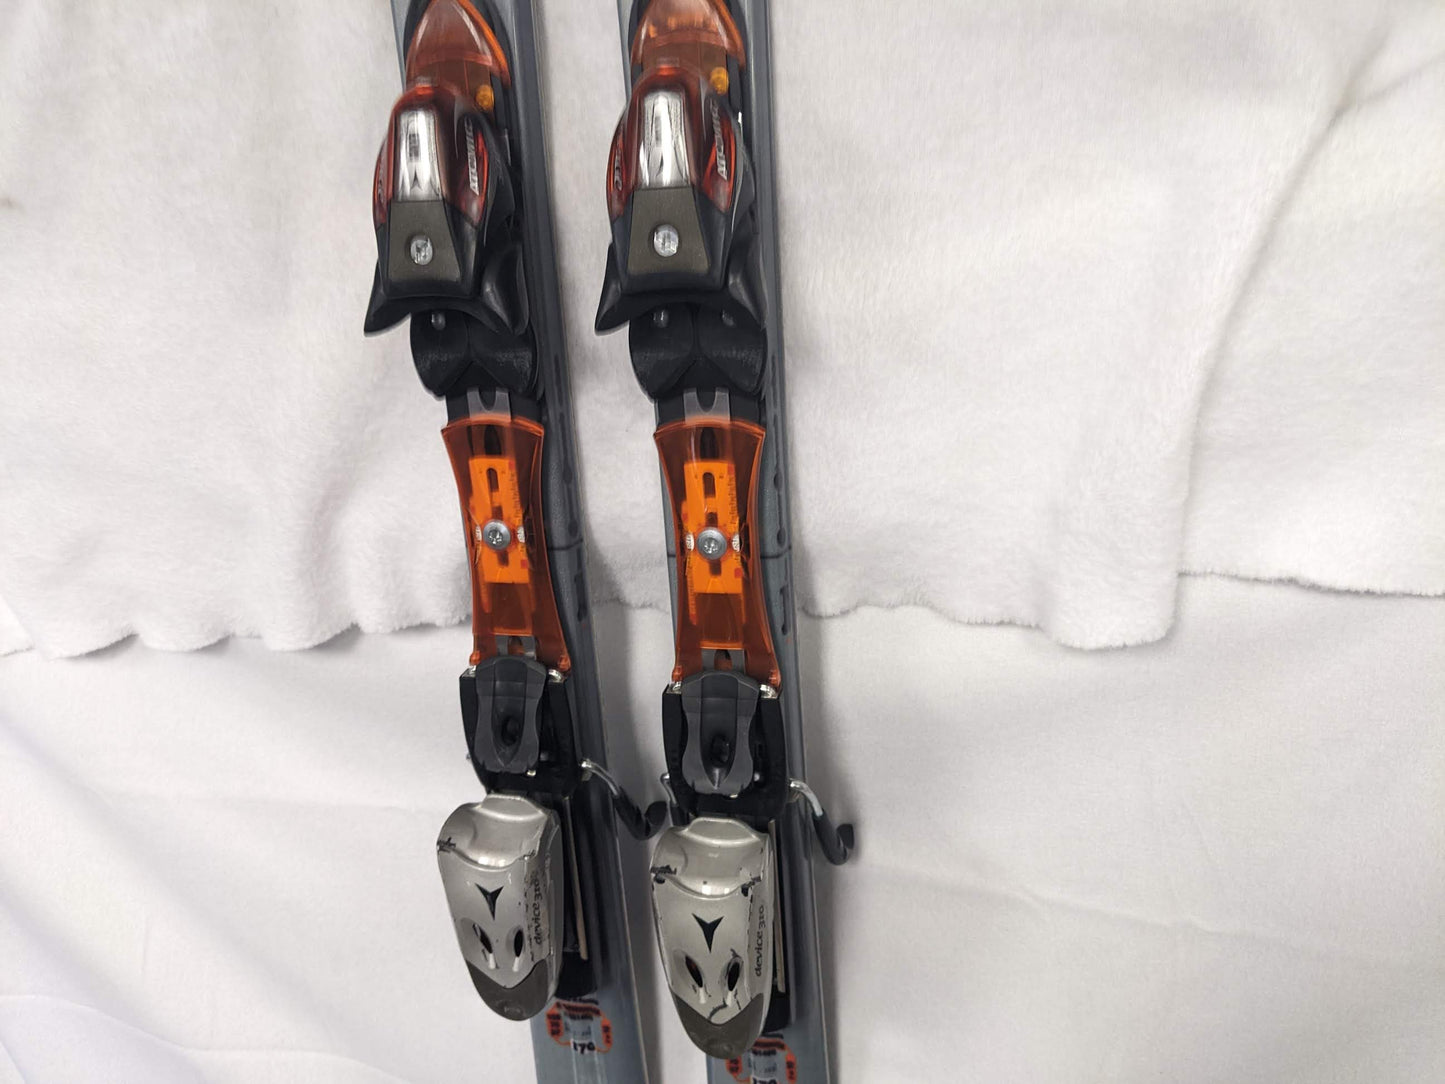 Atomic Beta Smart Zone PC Skis with Atomic Bindings Size 170 Cm Color Gray Condition Used